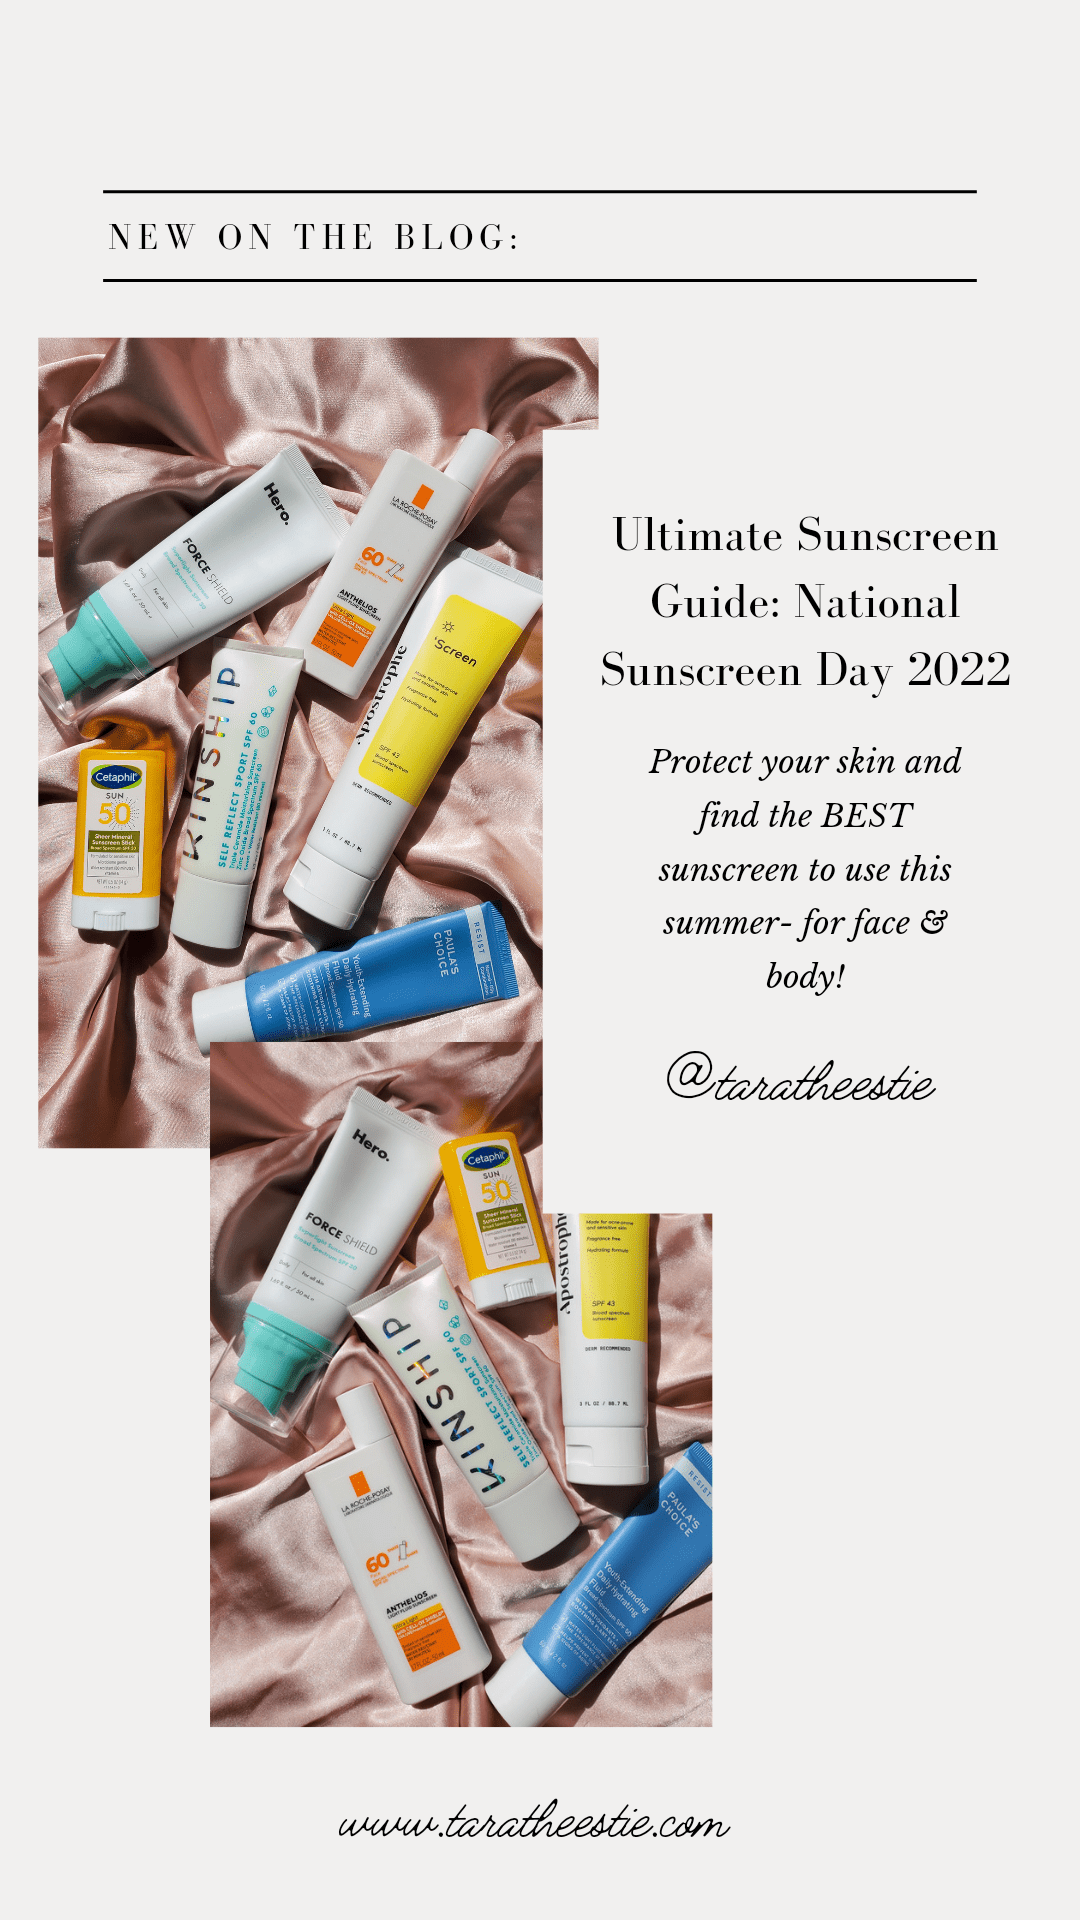 Ultimate Sunscreen Guide for No Fry Day 2022